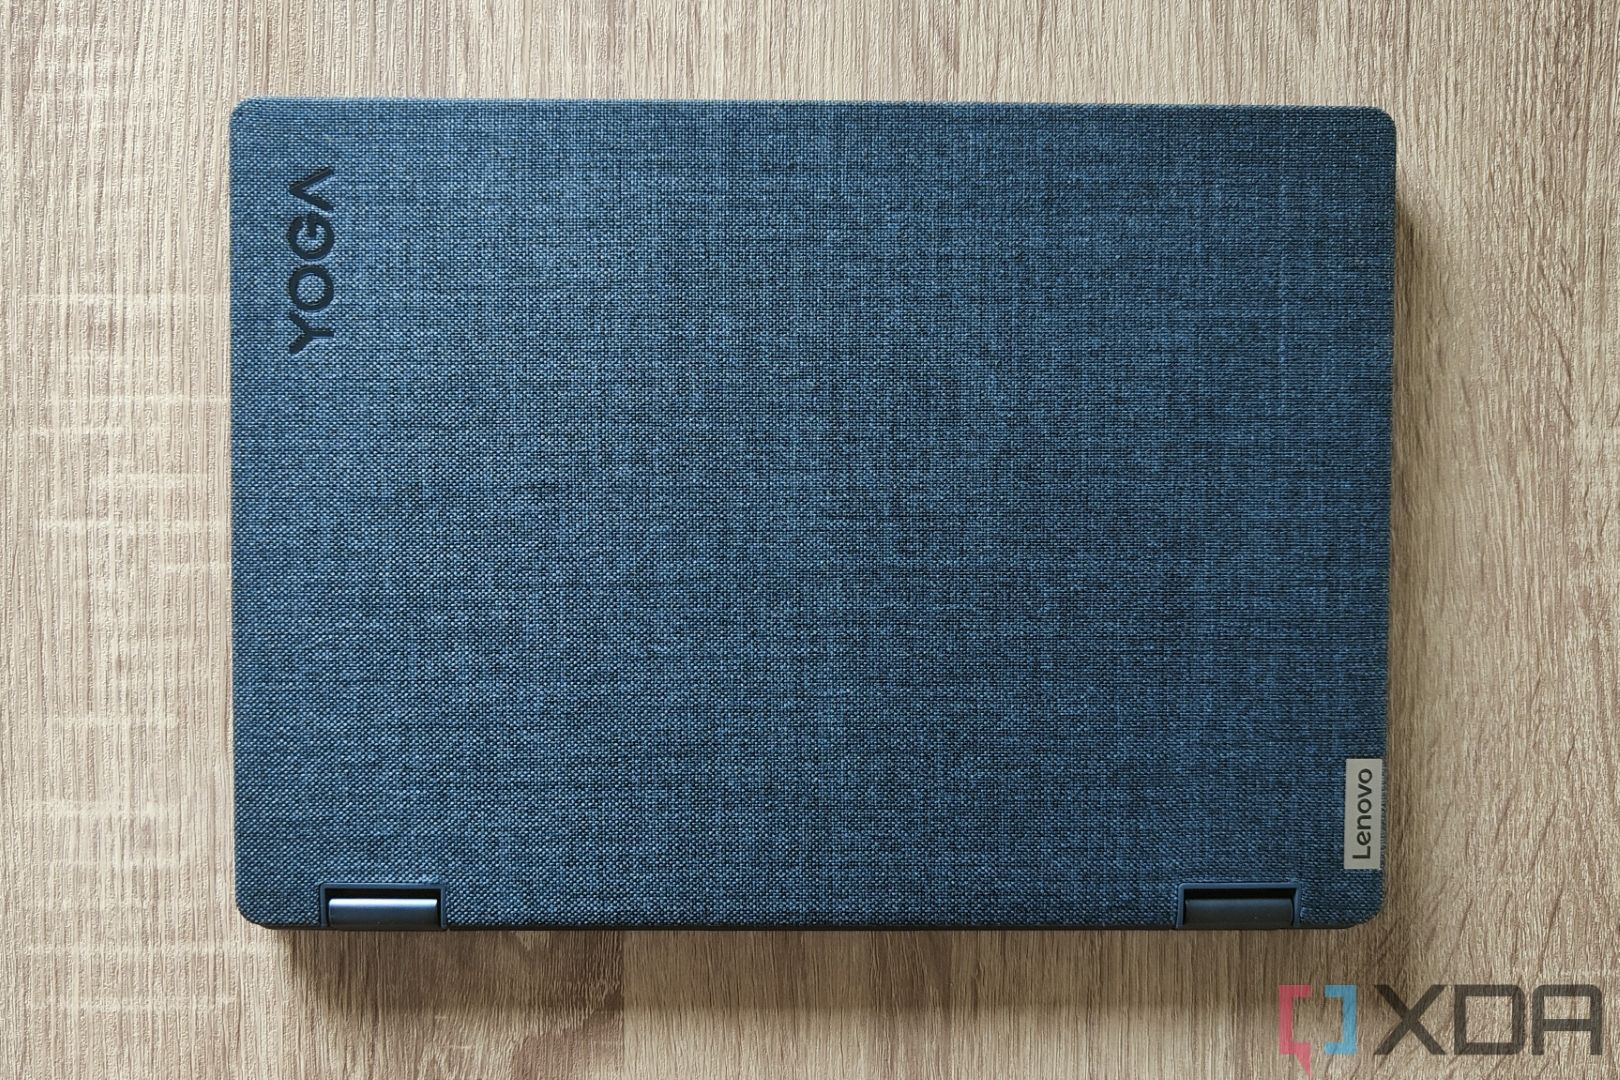 Overhead view of the Lenovo Yoga 6 2022 model with the lid closed